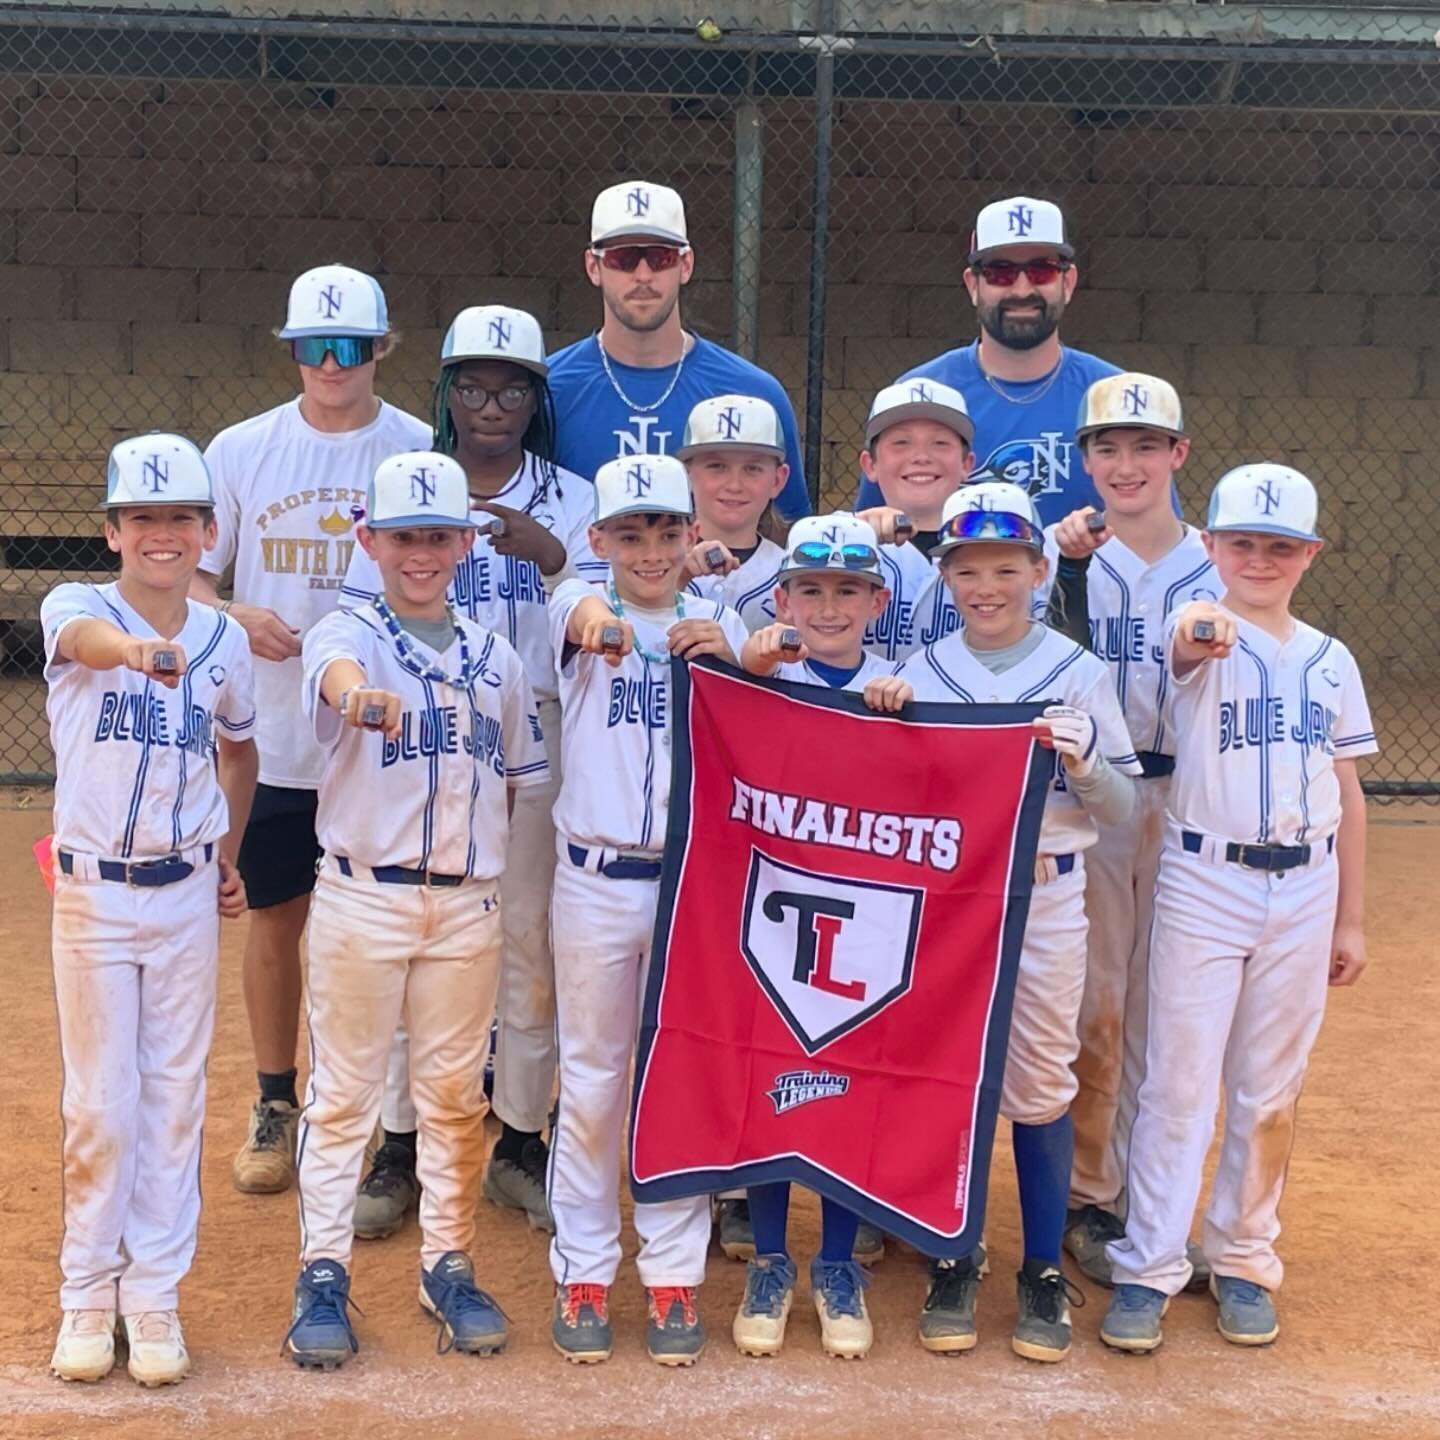 Congratulations to the Blue Jays 10U Bell on going 4-1 on the weekend and finishing as runner-up of the Training Legends Cobb/Cherokee Classic. Go Blue Jays!